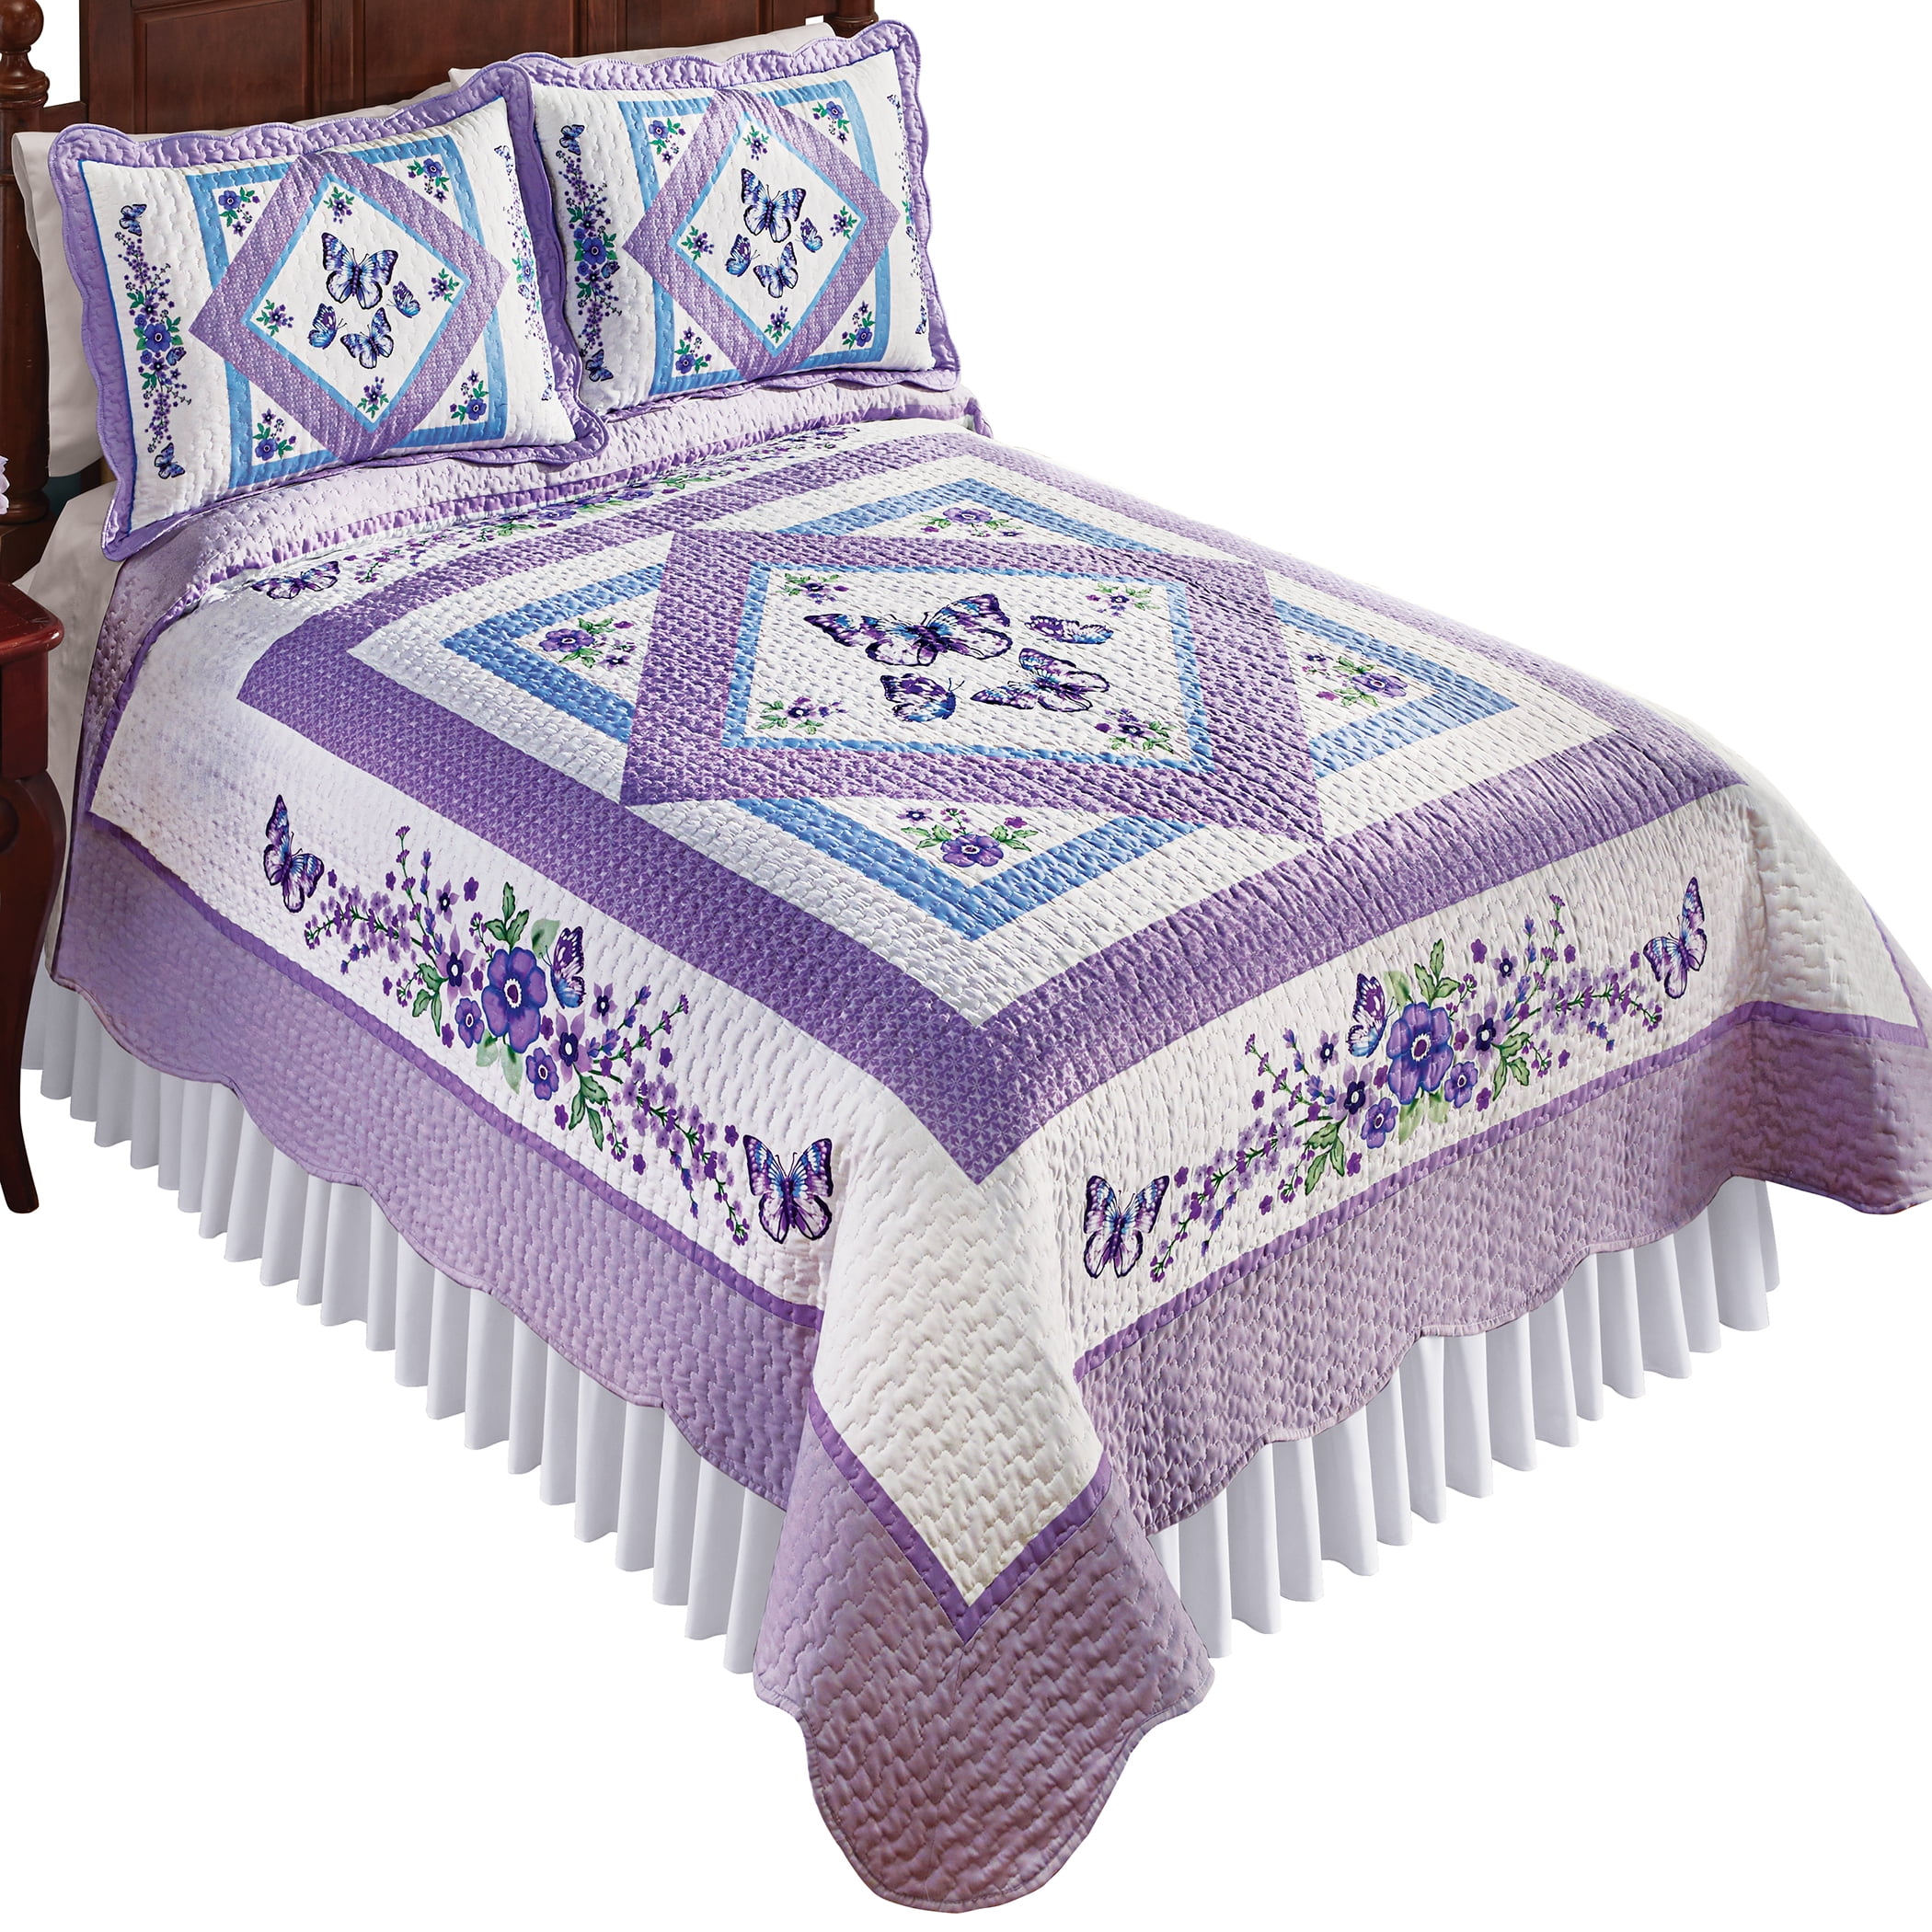 Floral Diamond and Stripes Patchwork Quilt to Instantly Add a Touch of Elegance 